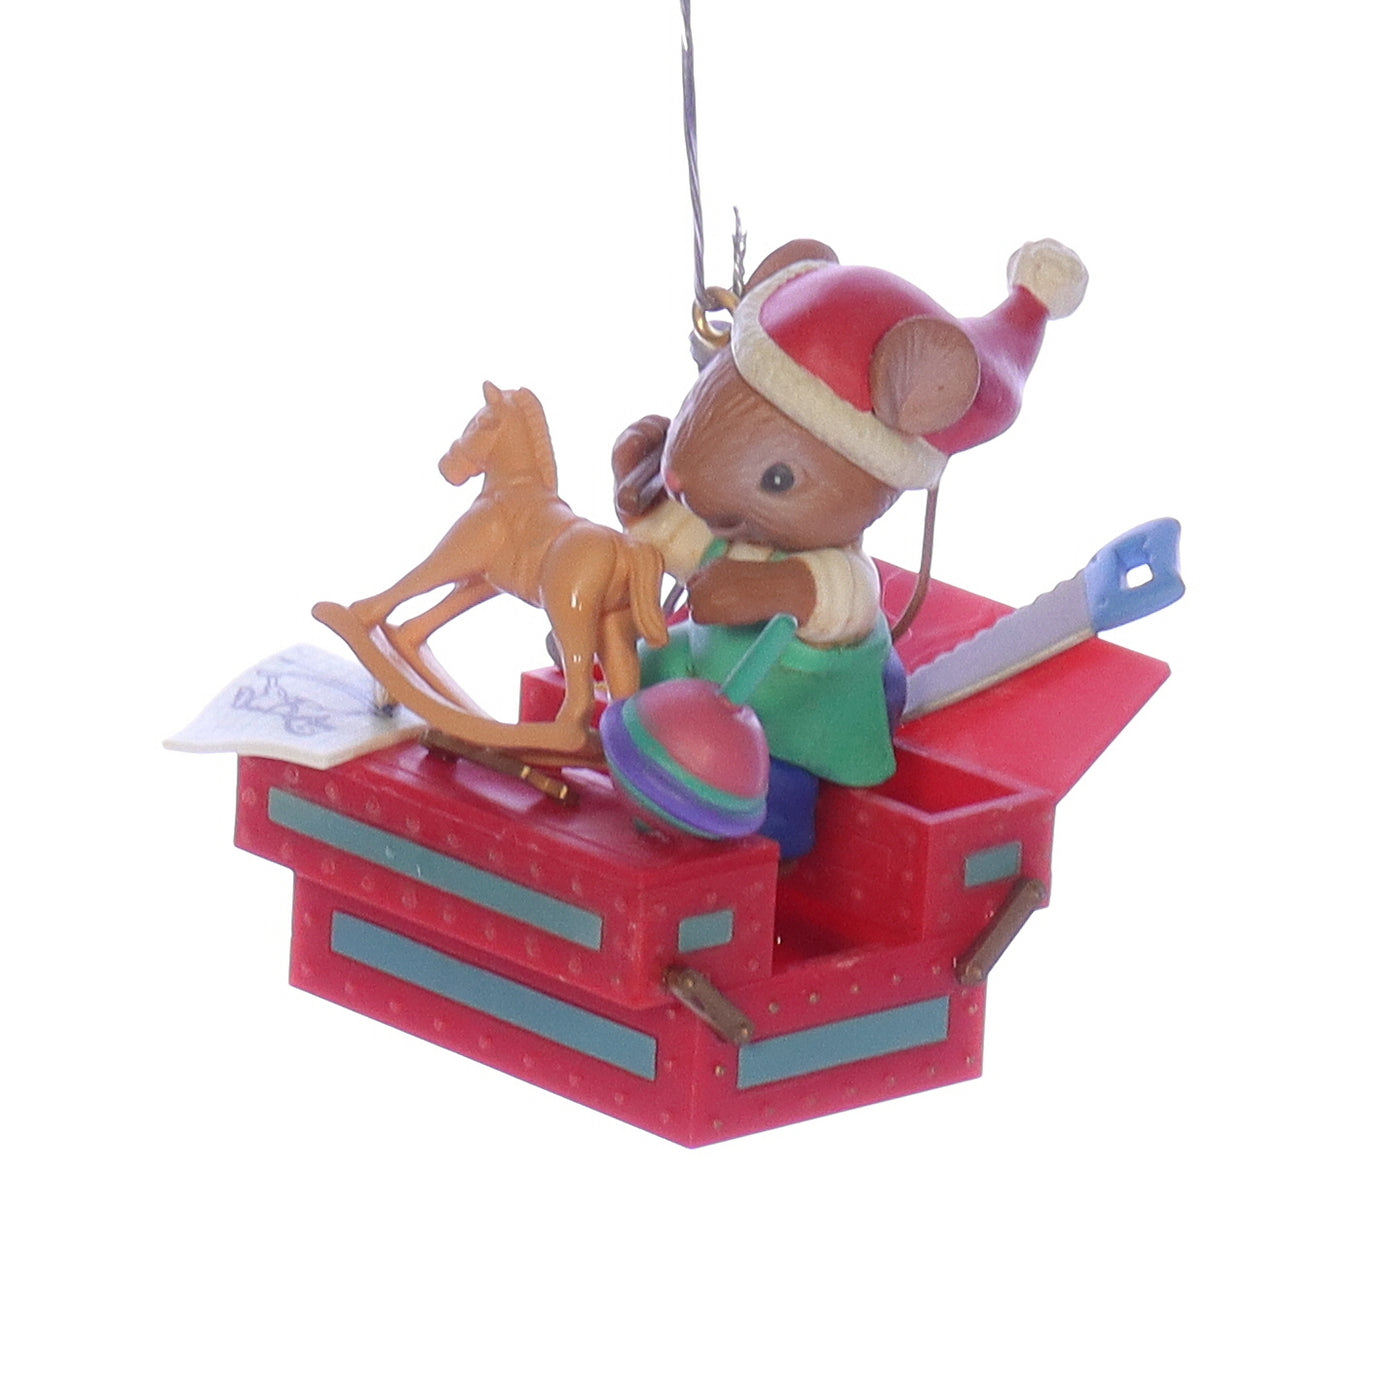 Enesco_Treasury_of_Christmas_Ornaments_584886_Merry_Christmas_Tool_You_Dad_Mouse_Ornament_1994 Front Left View